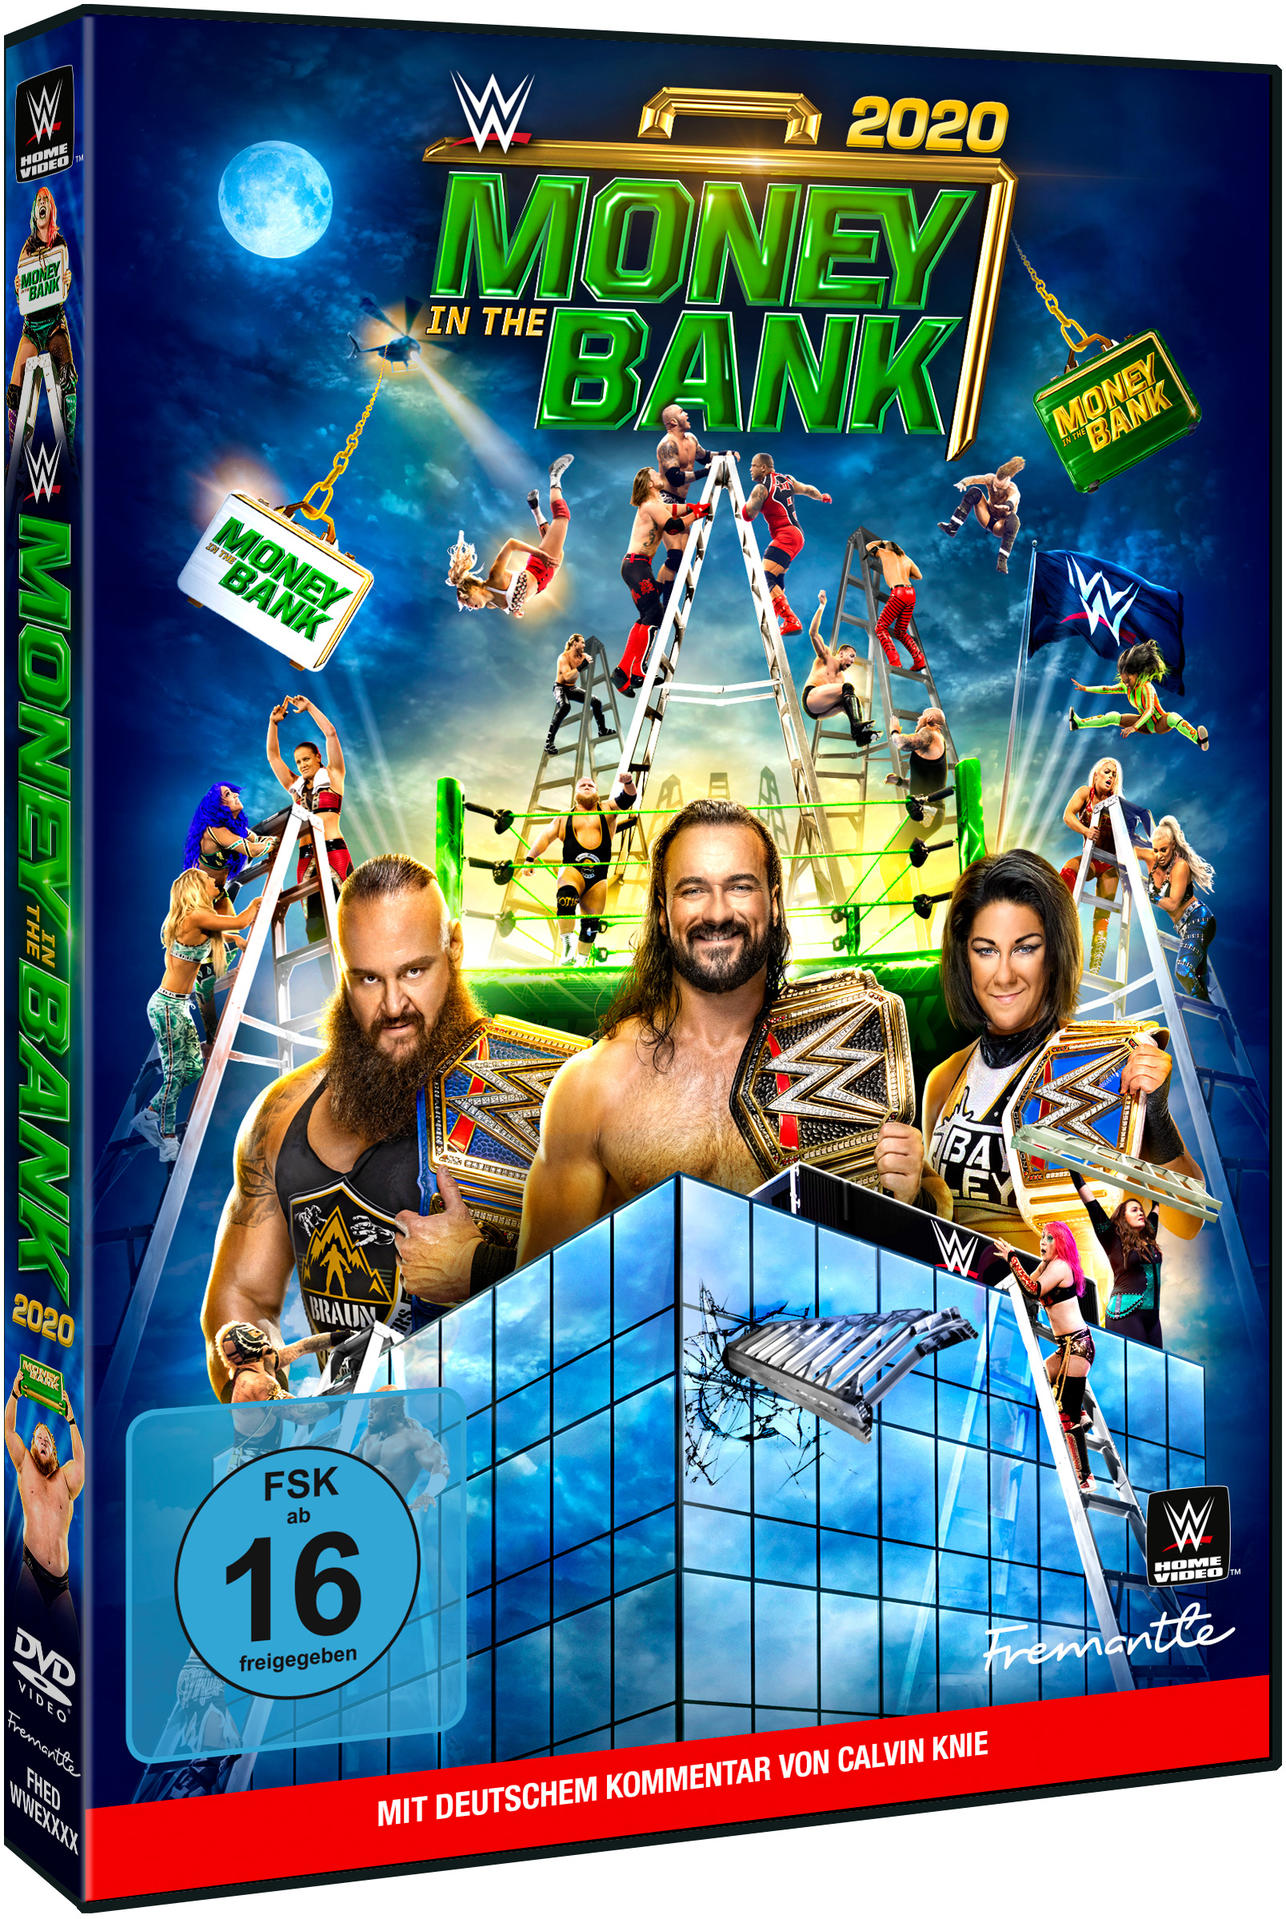 2020 The Bank In Money DVD WWE: